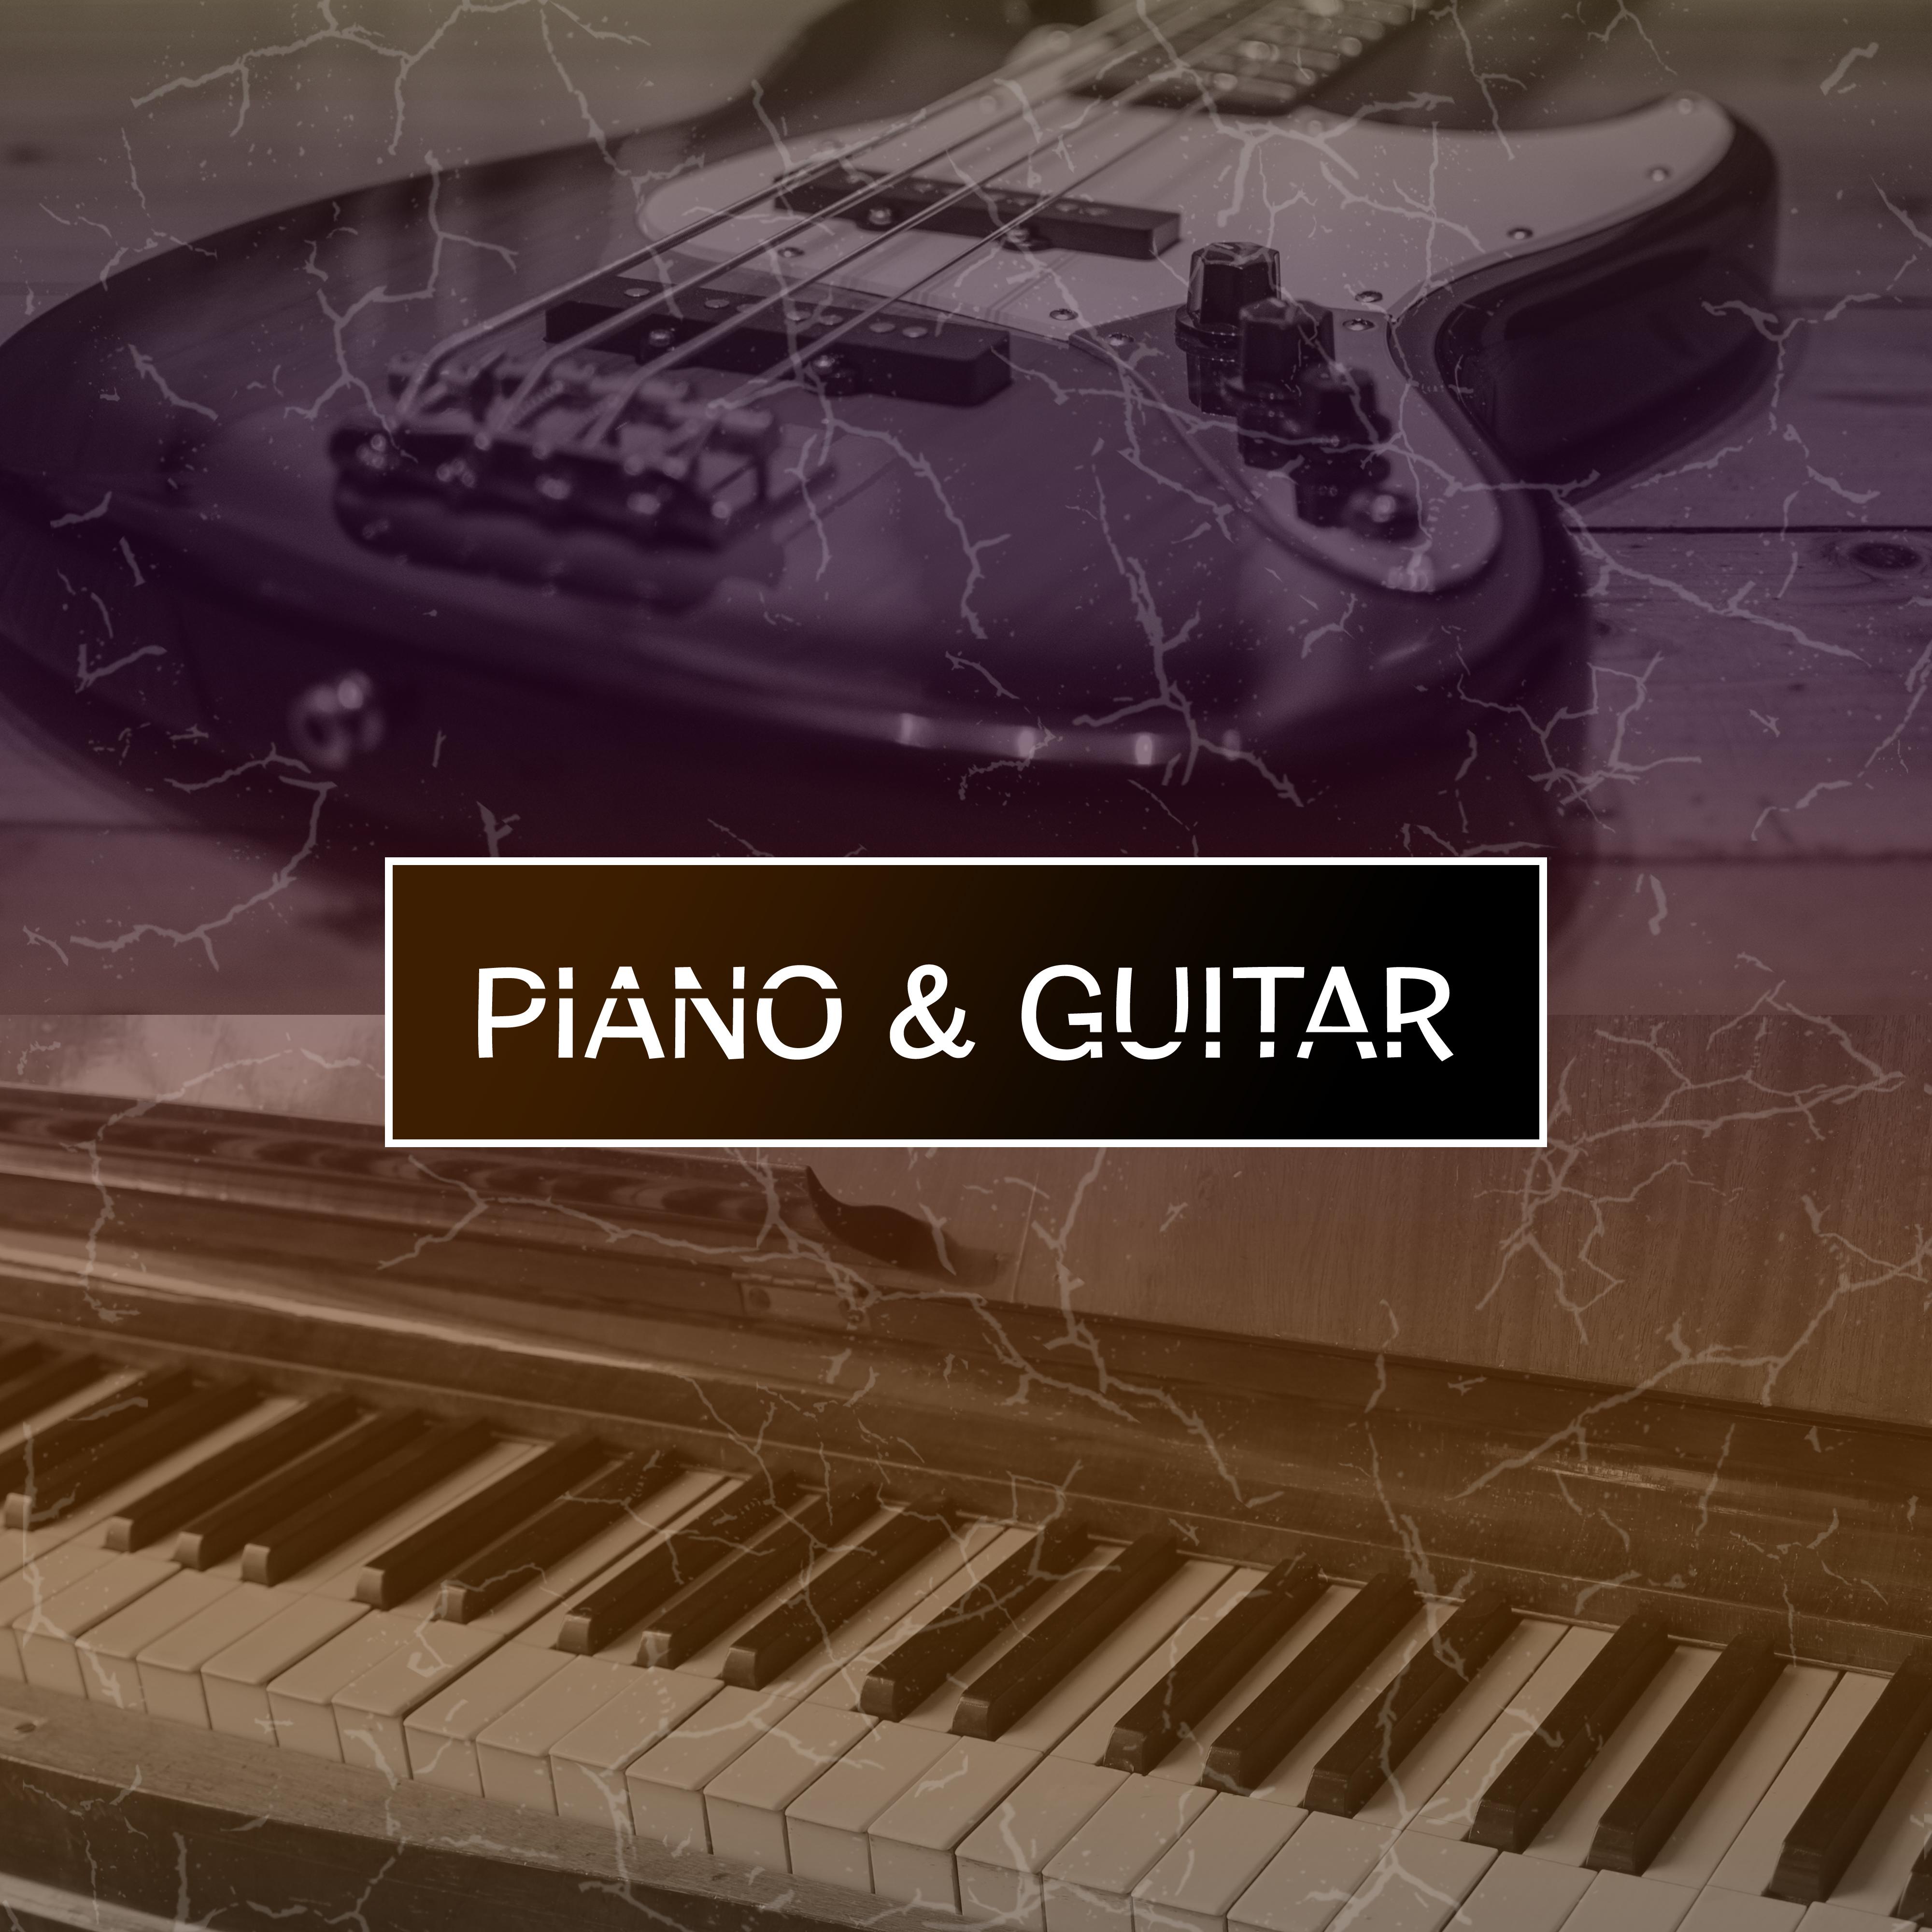 Piano & Guitar – Instrumental Jazz Music, Chilled Jazz, Soothing Instruments at Night, Relaxation, Best Smooth Jazz